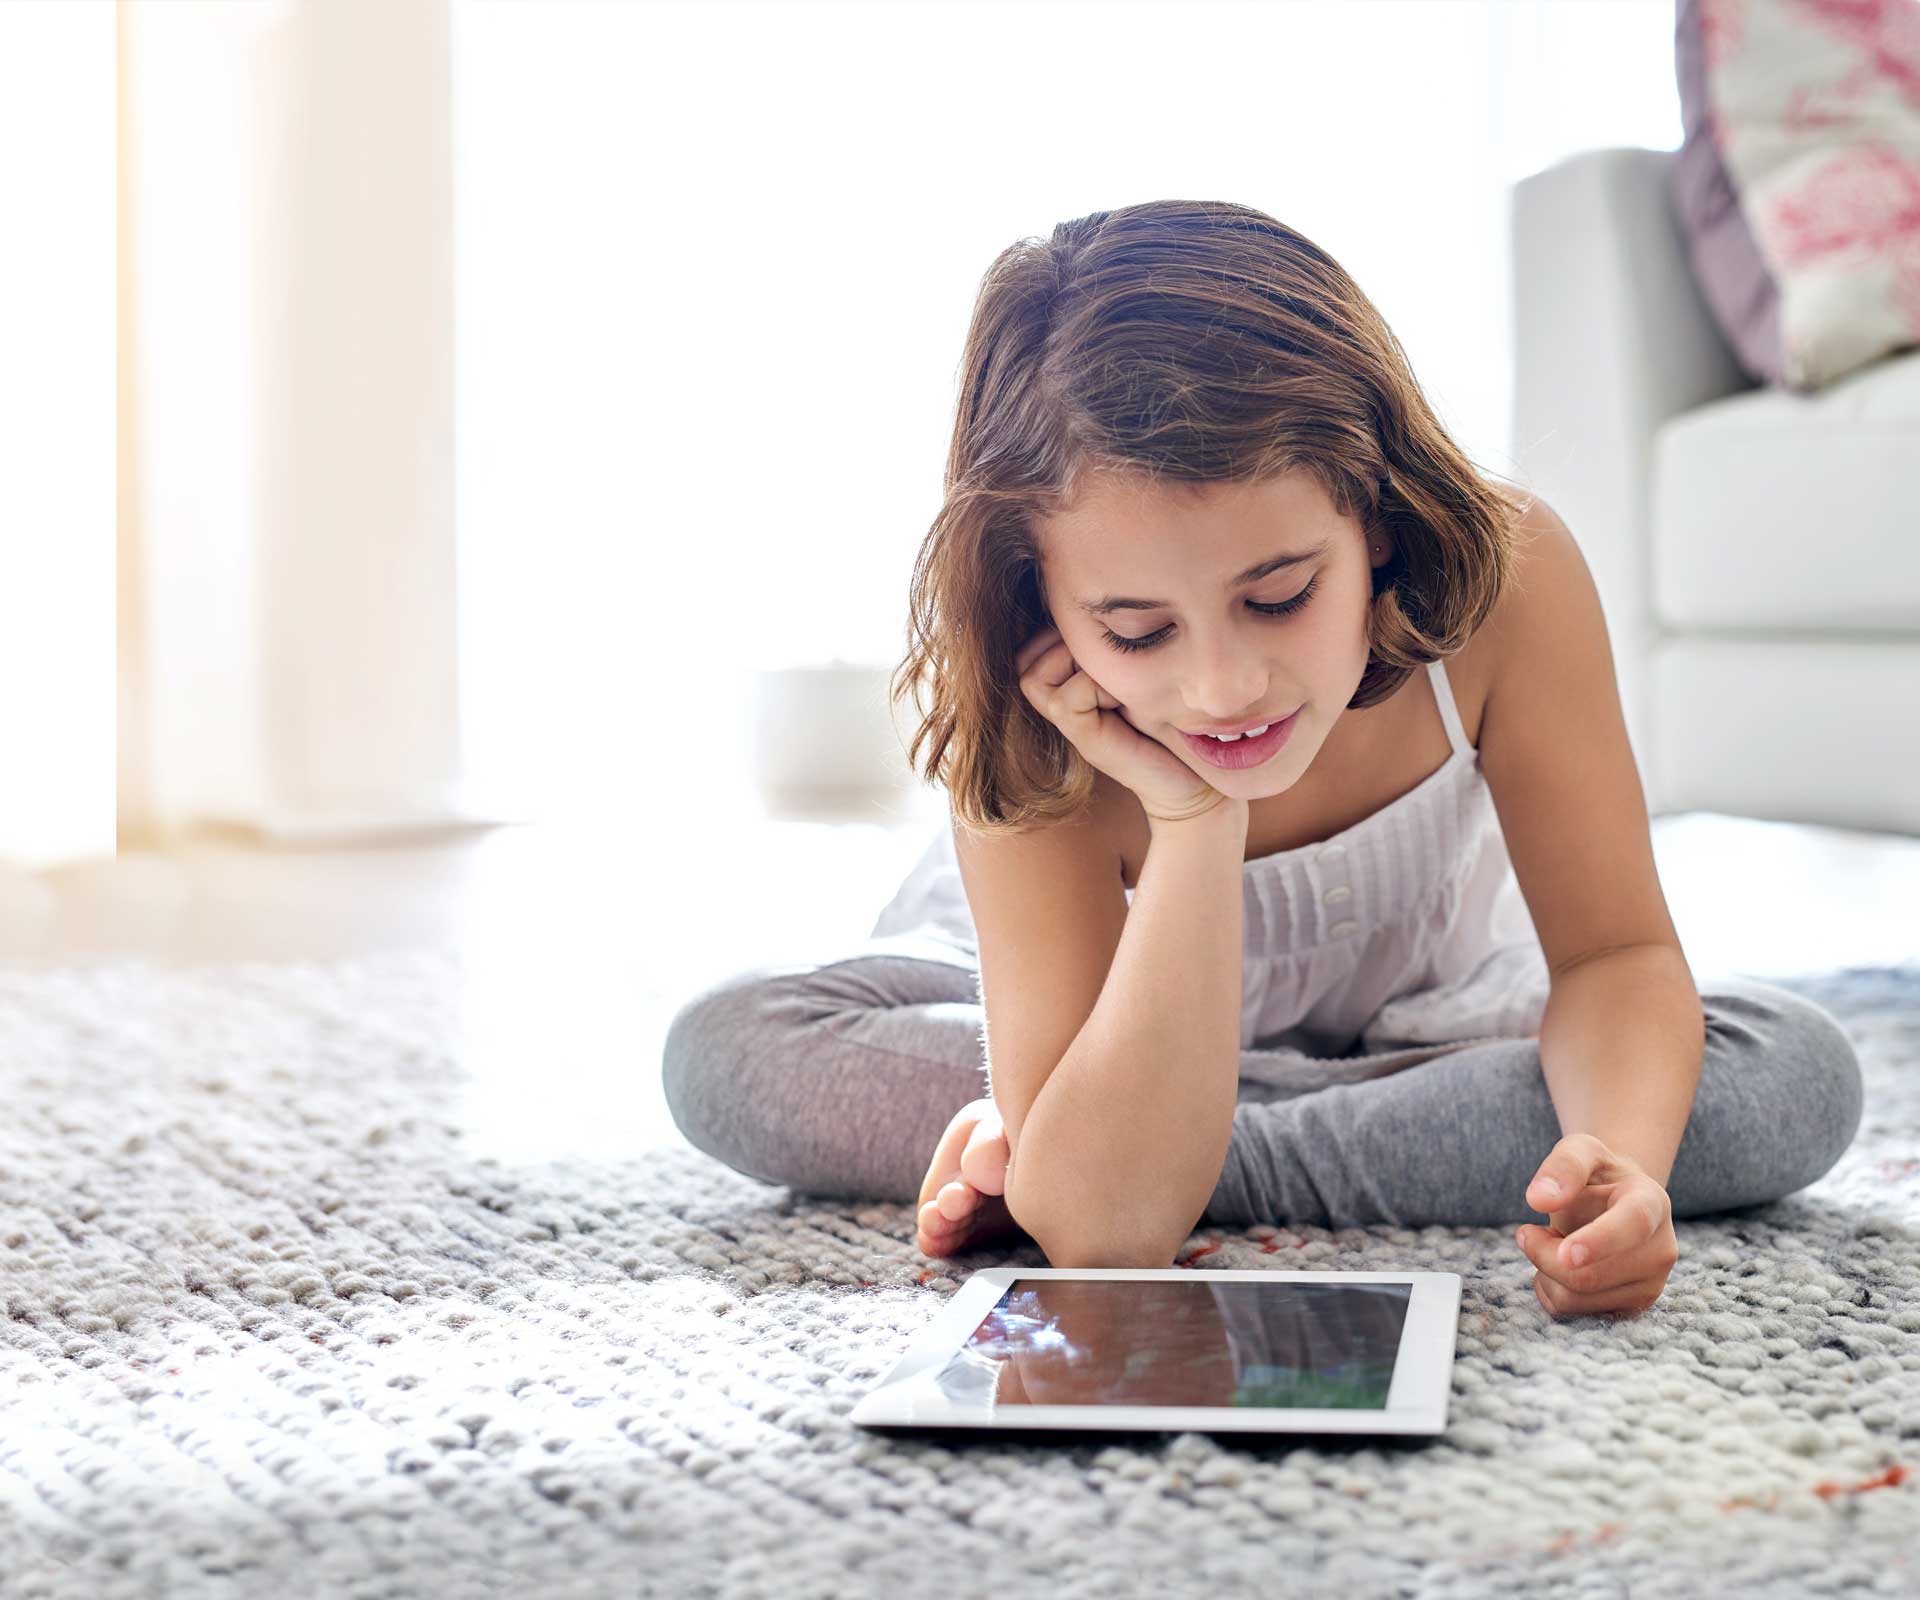 What to do if your child is spending too much time online